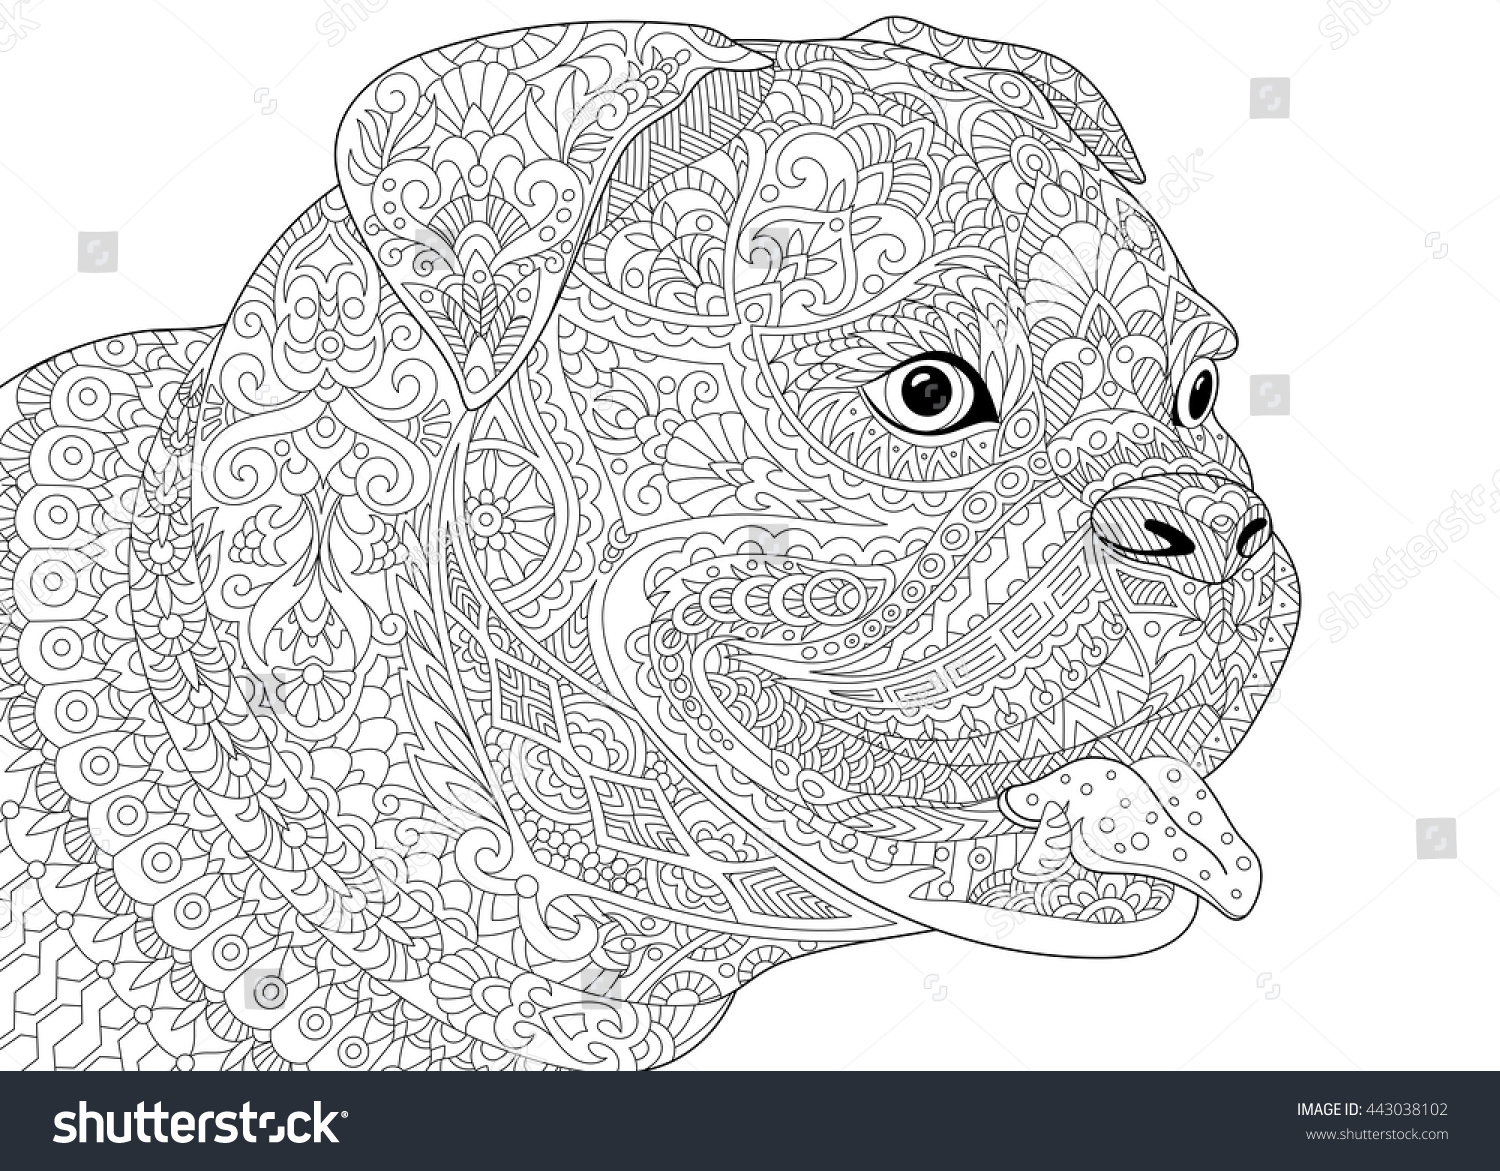 Coloring page of german boxer dog symbol of 2018 Chinese New Year Freehand sketch